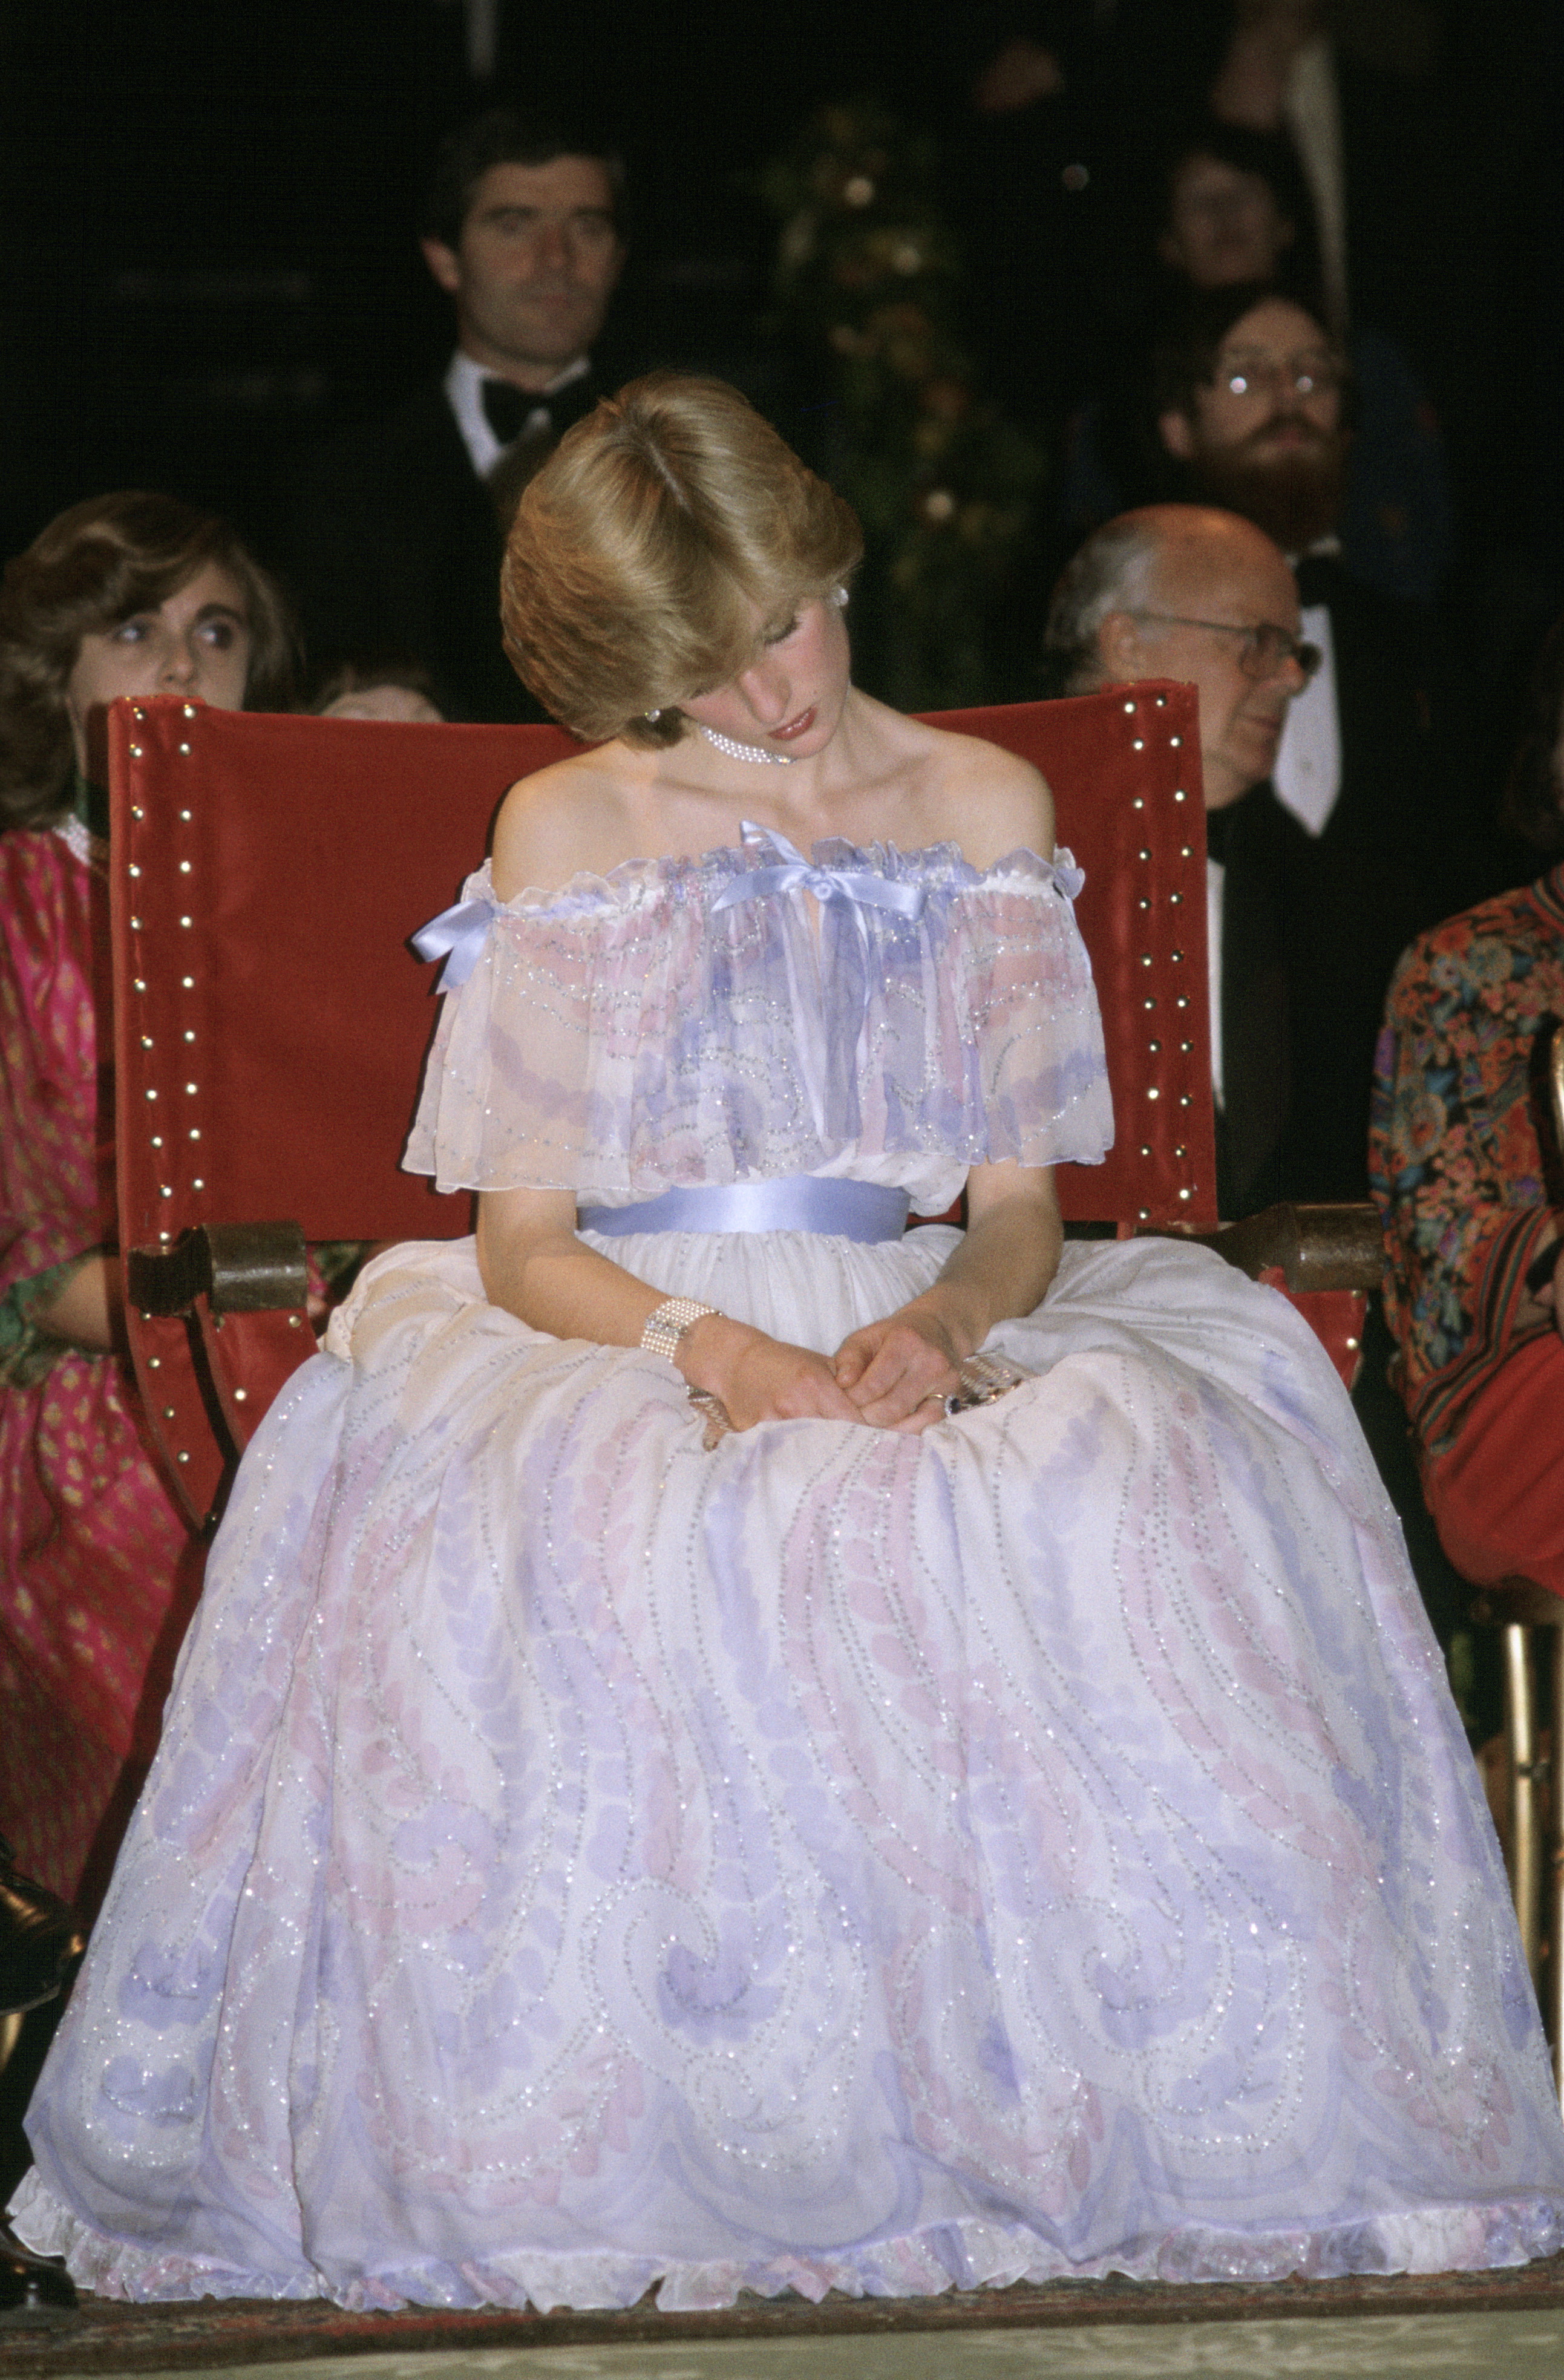 A photo of Princess Diana sitting and laughing in a purple ball gown